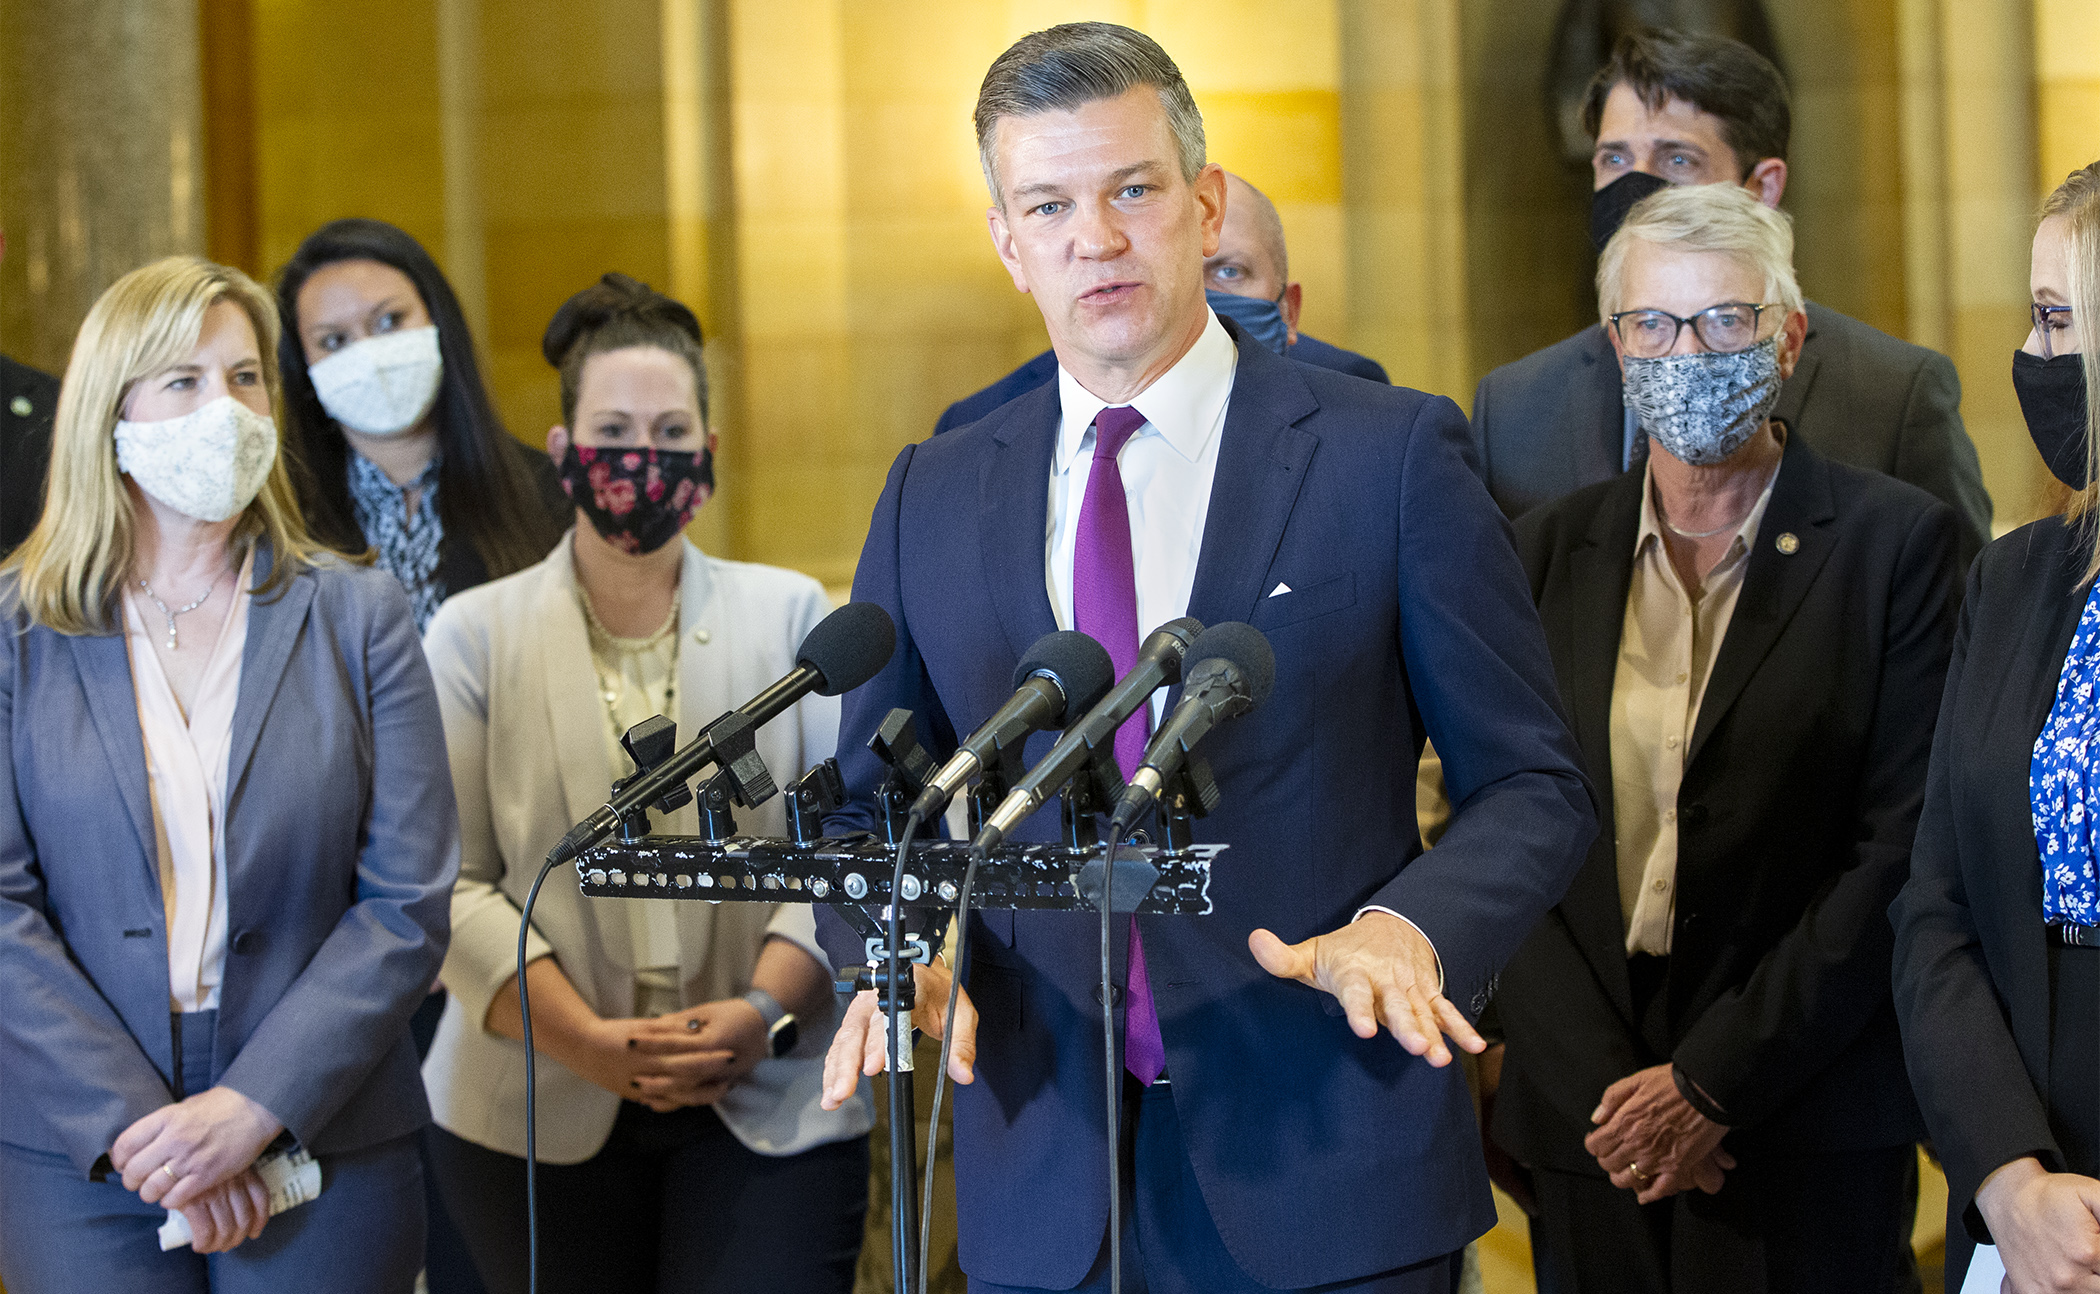 House Majority Leader Ryan Winkler (DFL-Golden Valley), pictured here during a May 2021 news conference, announced Oct. 5 he plans to run for Hennepin County attorney in 2022. House Photography file photo